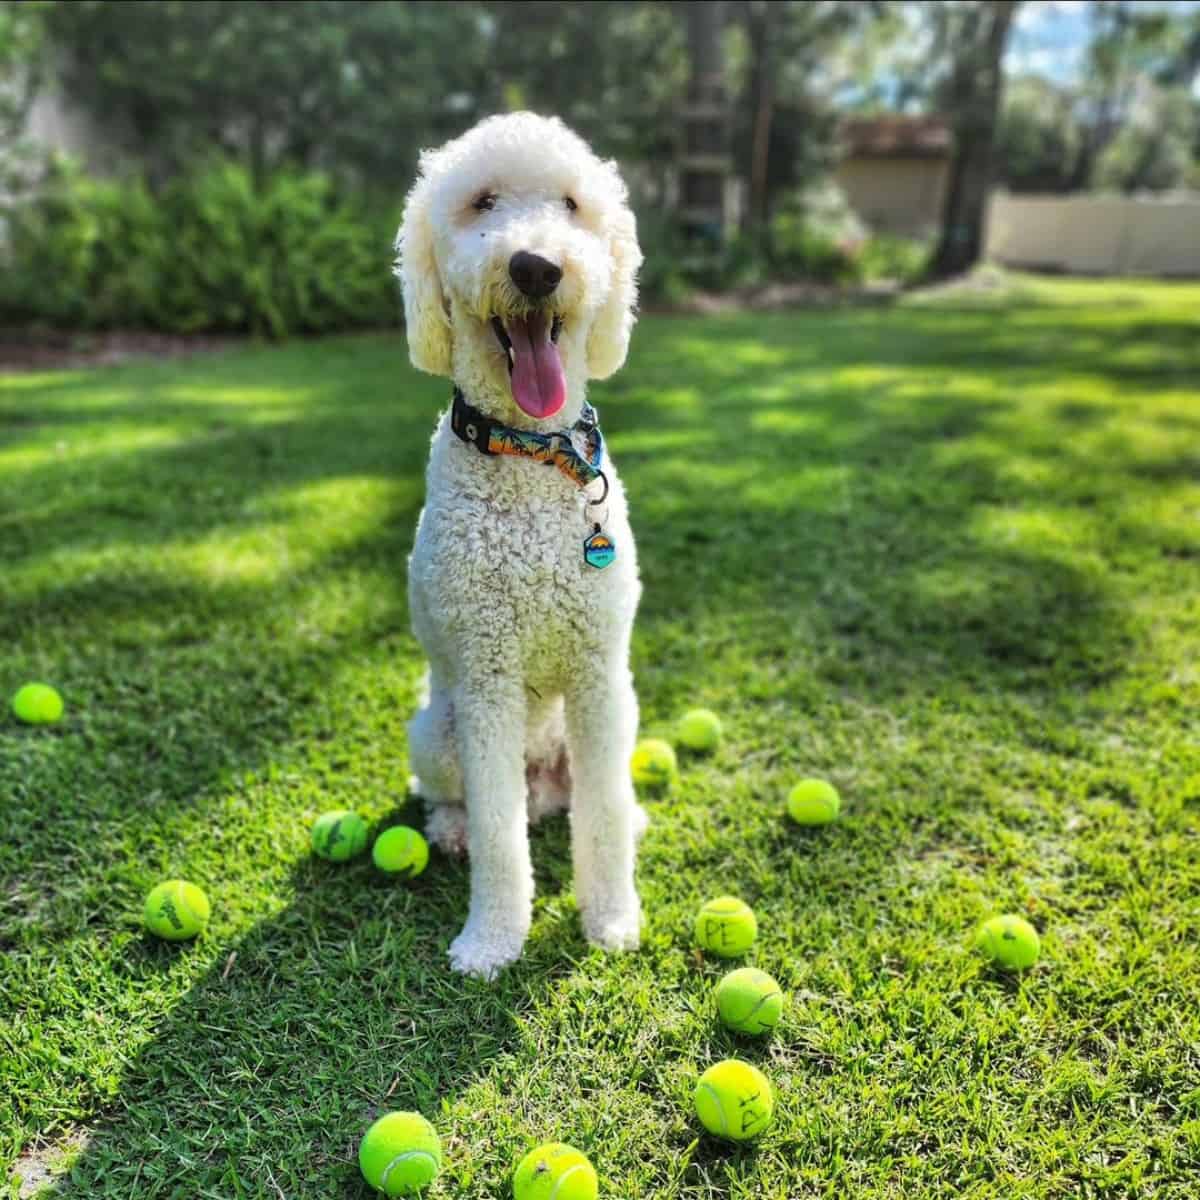 Goldendoodle plays with tennis balls